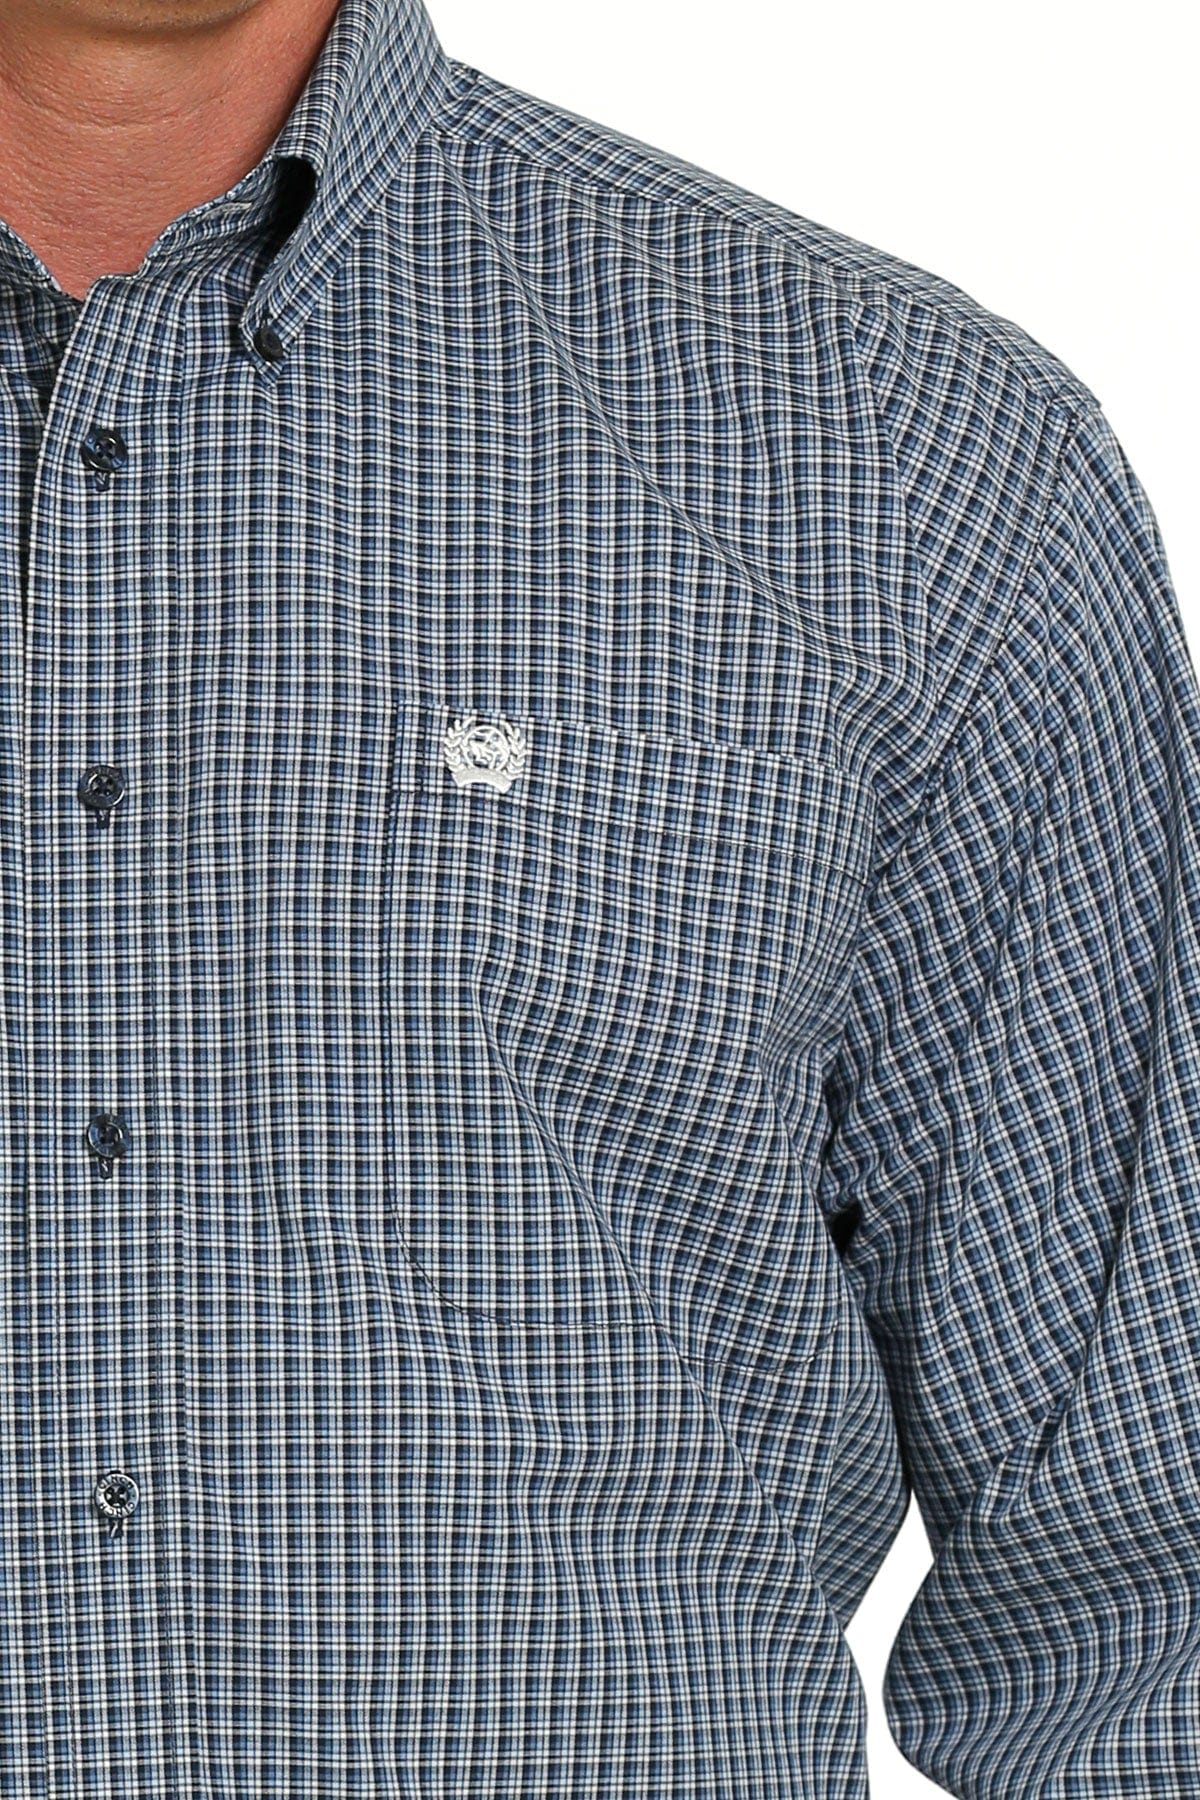 Men's Cinch L/S, Modern Fit, Navy with Brown and White Plaid